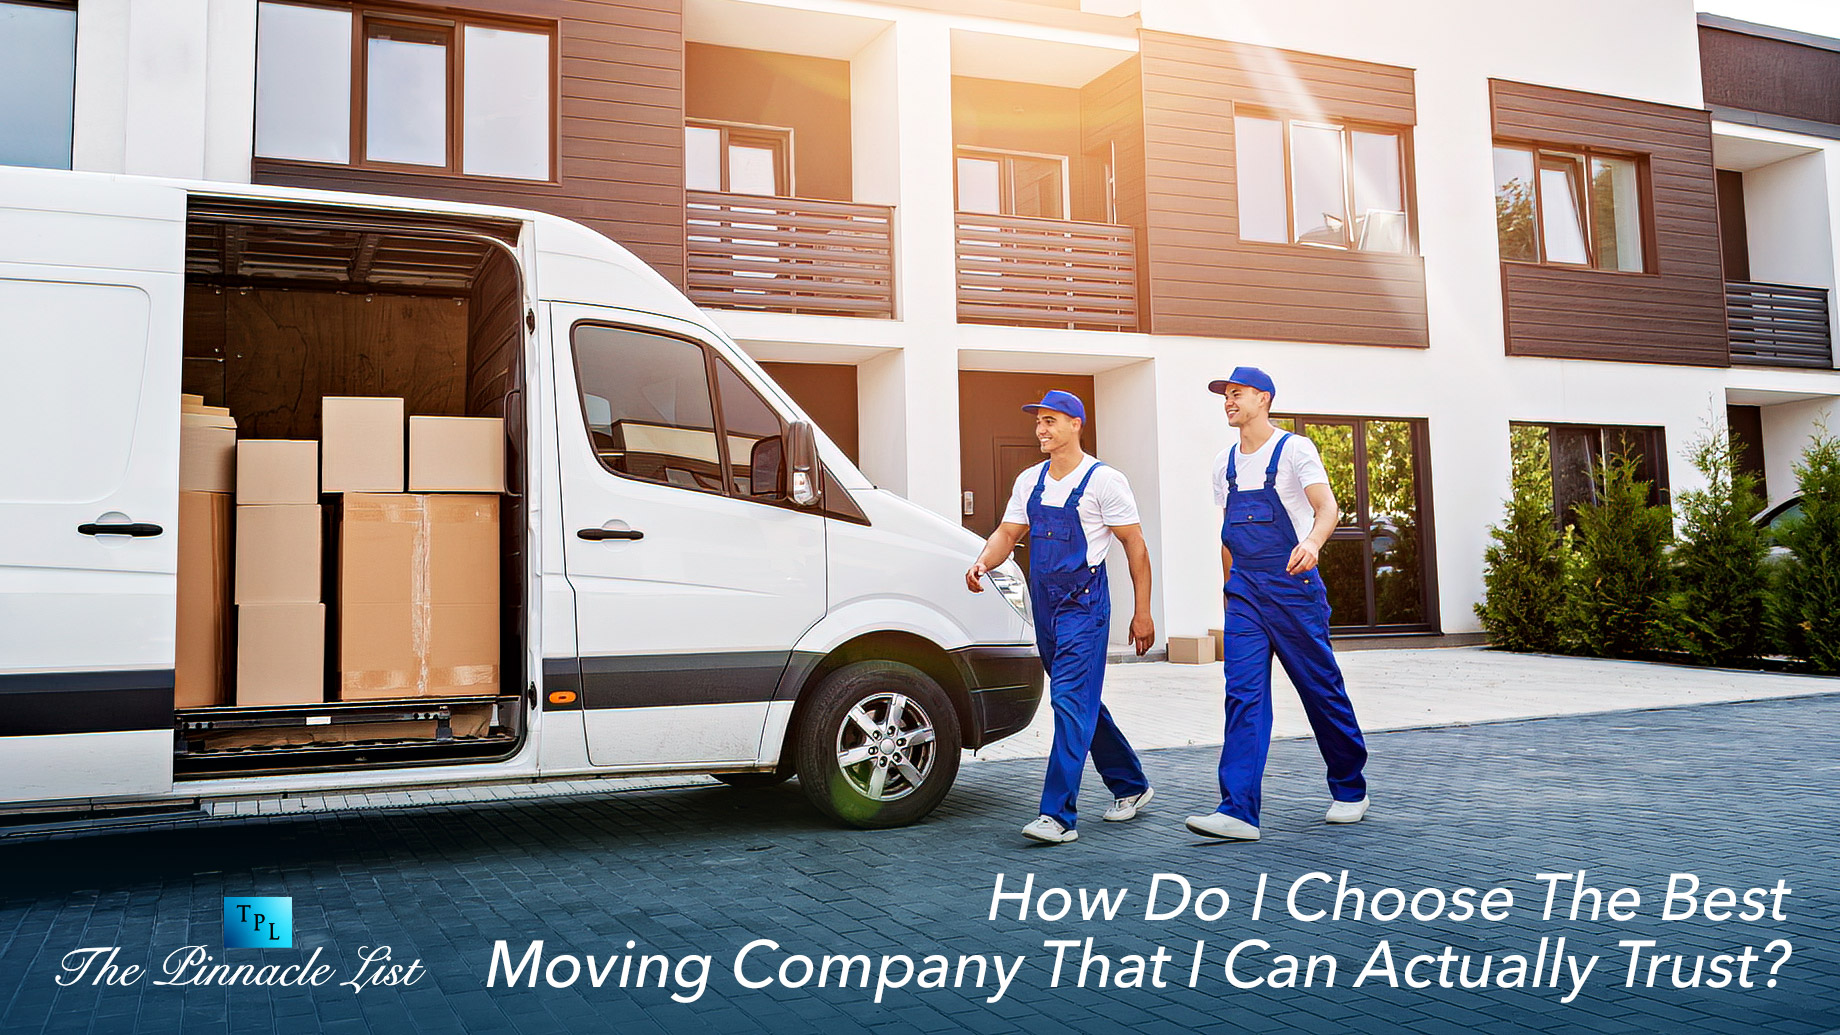 How Do I Choose The Best Moving Company That I Can Actually Trust?